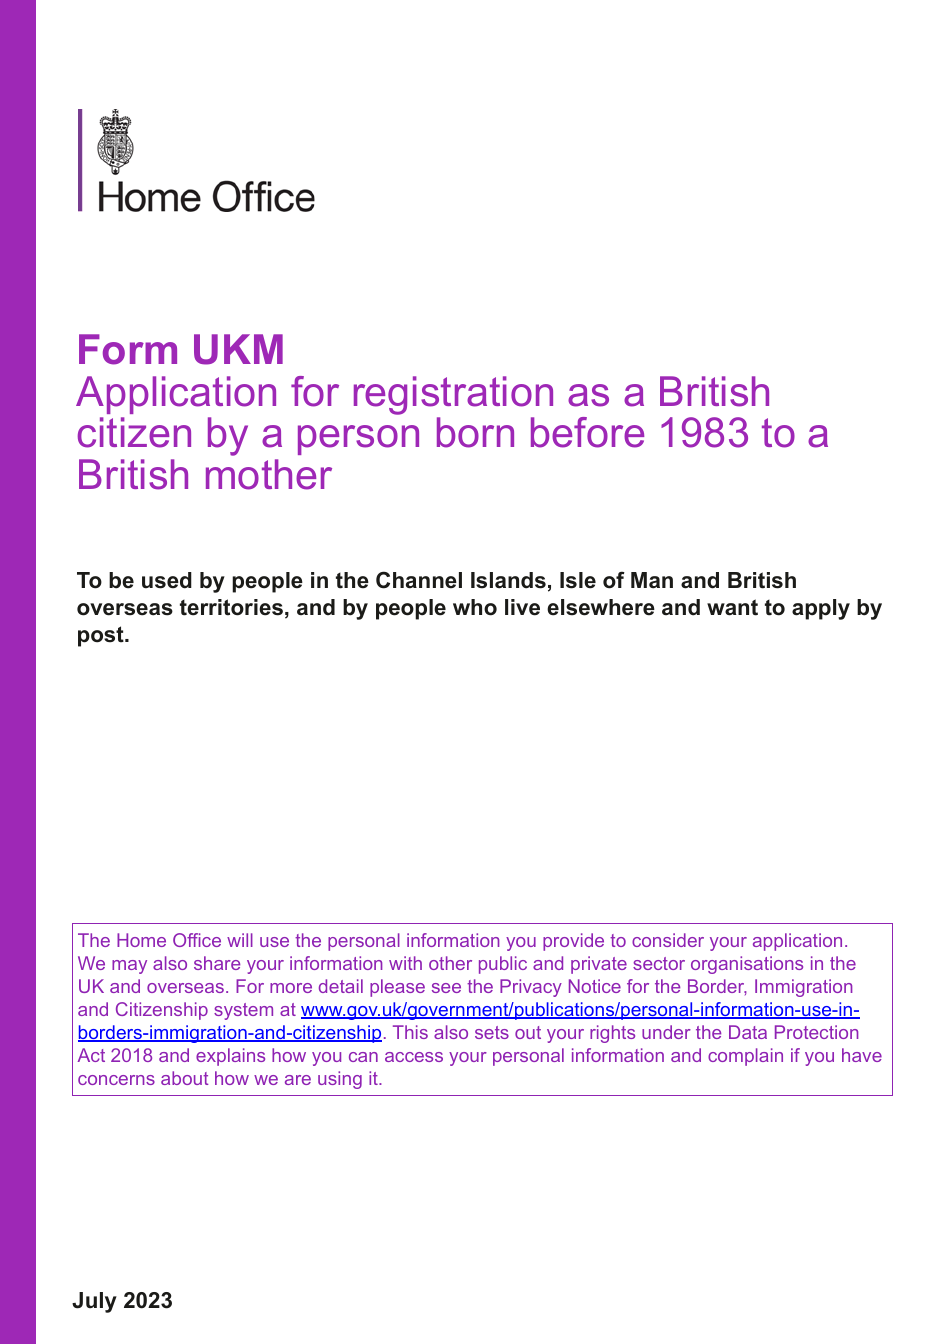 Form UKM Application for Registration as a British Citizen by a Person Born Before 1983 to a British Mother - United Kingdom, Page 1